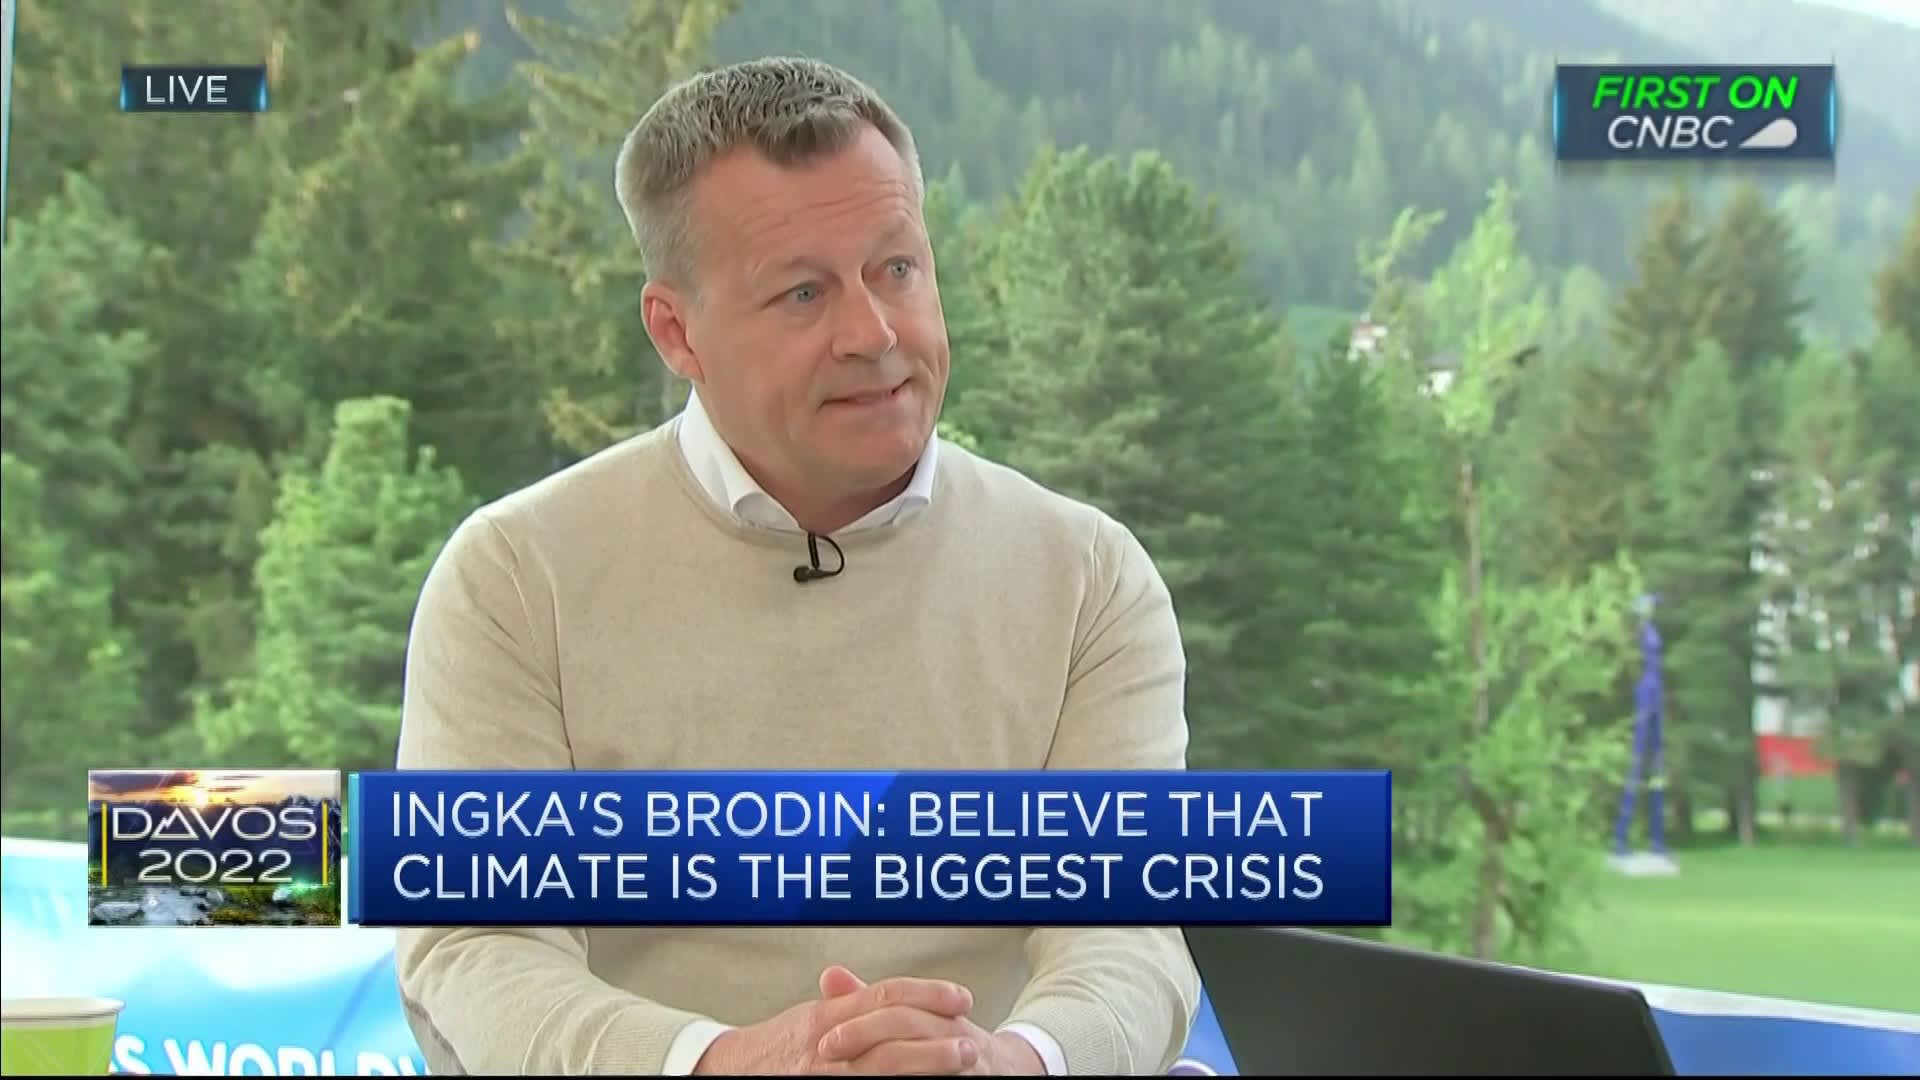 Reducing carbon is the smart thing to do financially, says CEO of Ikea-owner Ingka